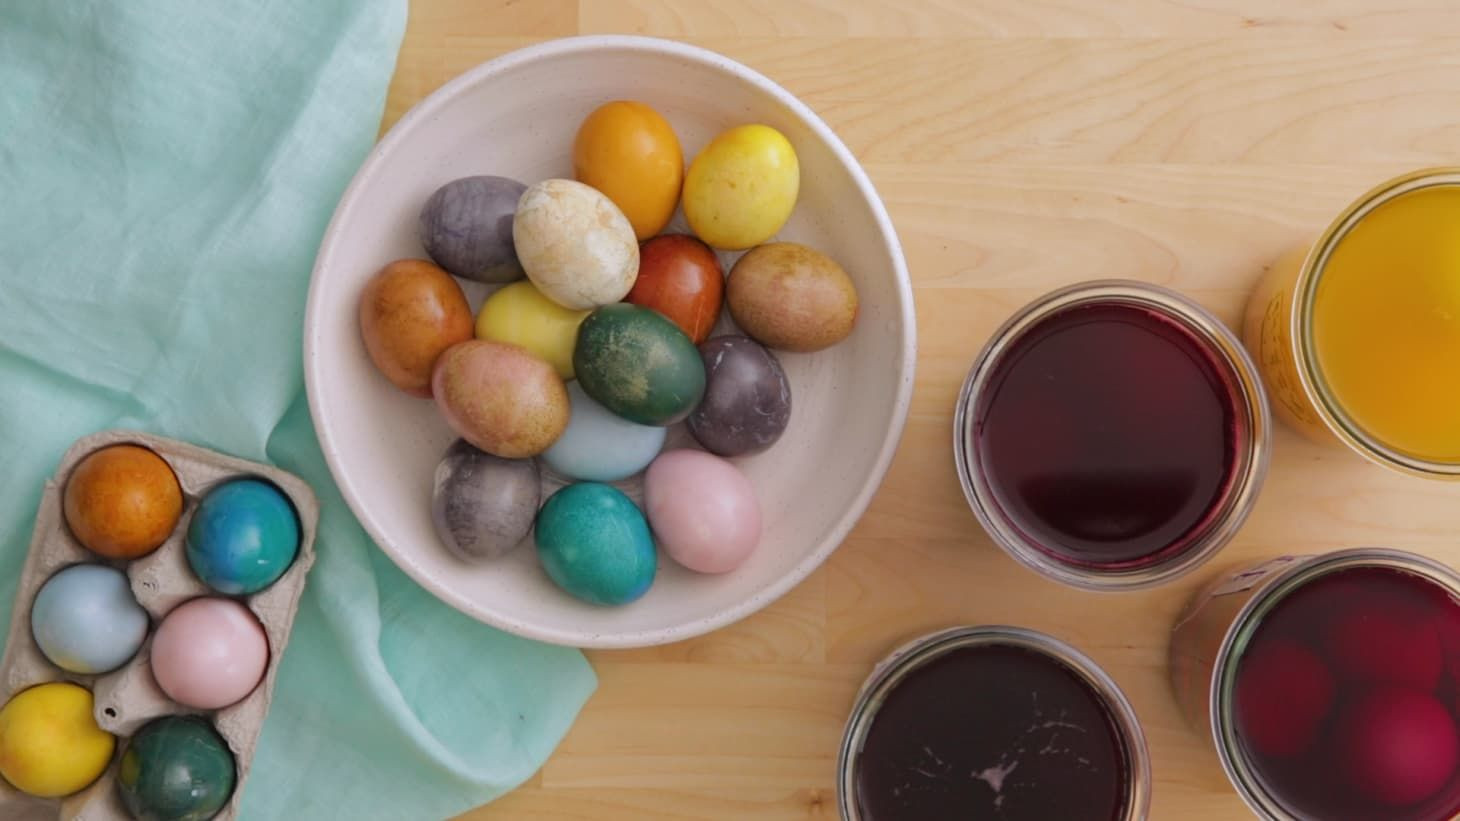 How To Make Easter Egg Dye With Food Coloring
 How To Make Naturally Dyed Easter Eggs